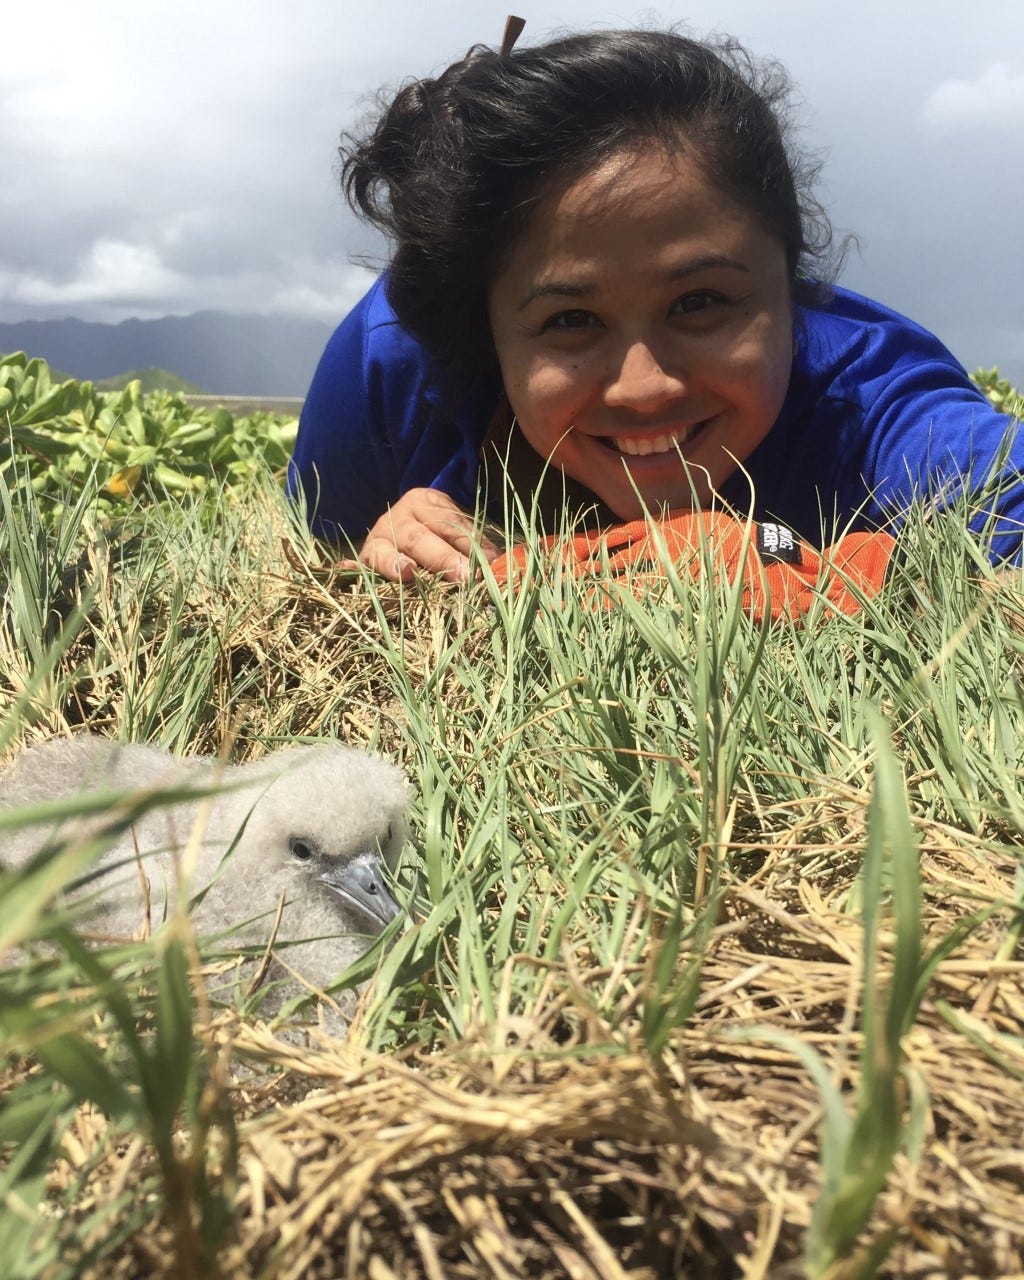 Smiling person in blue shirt lays on grass next to seabird chick.